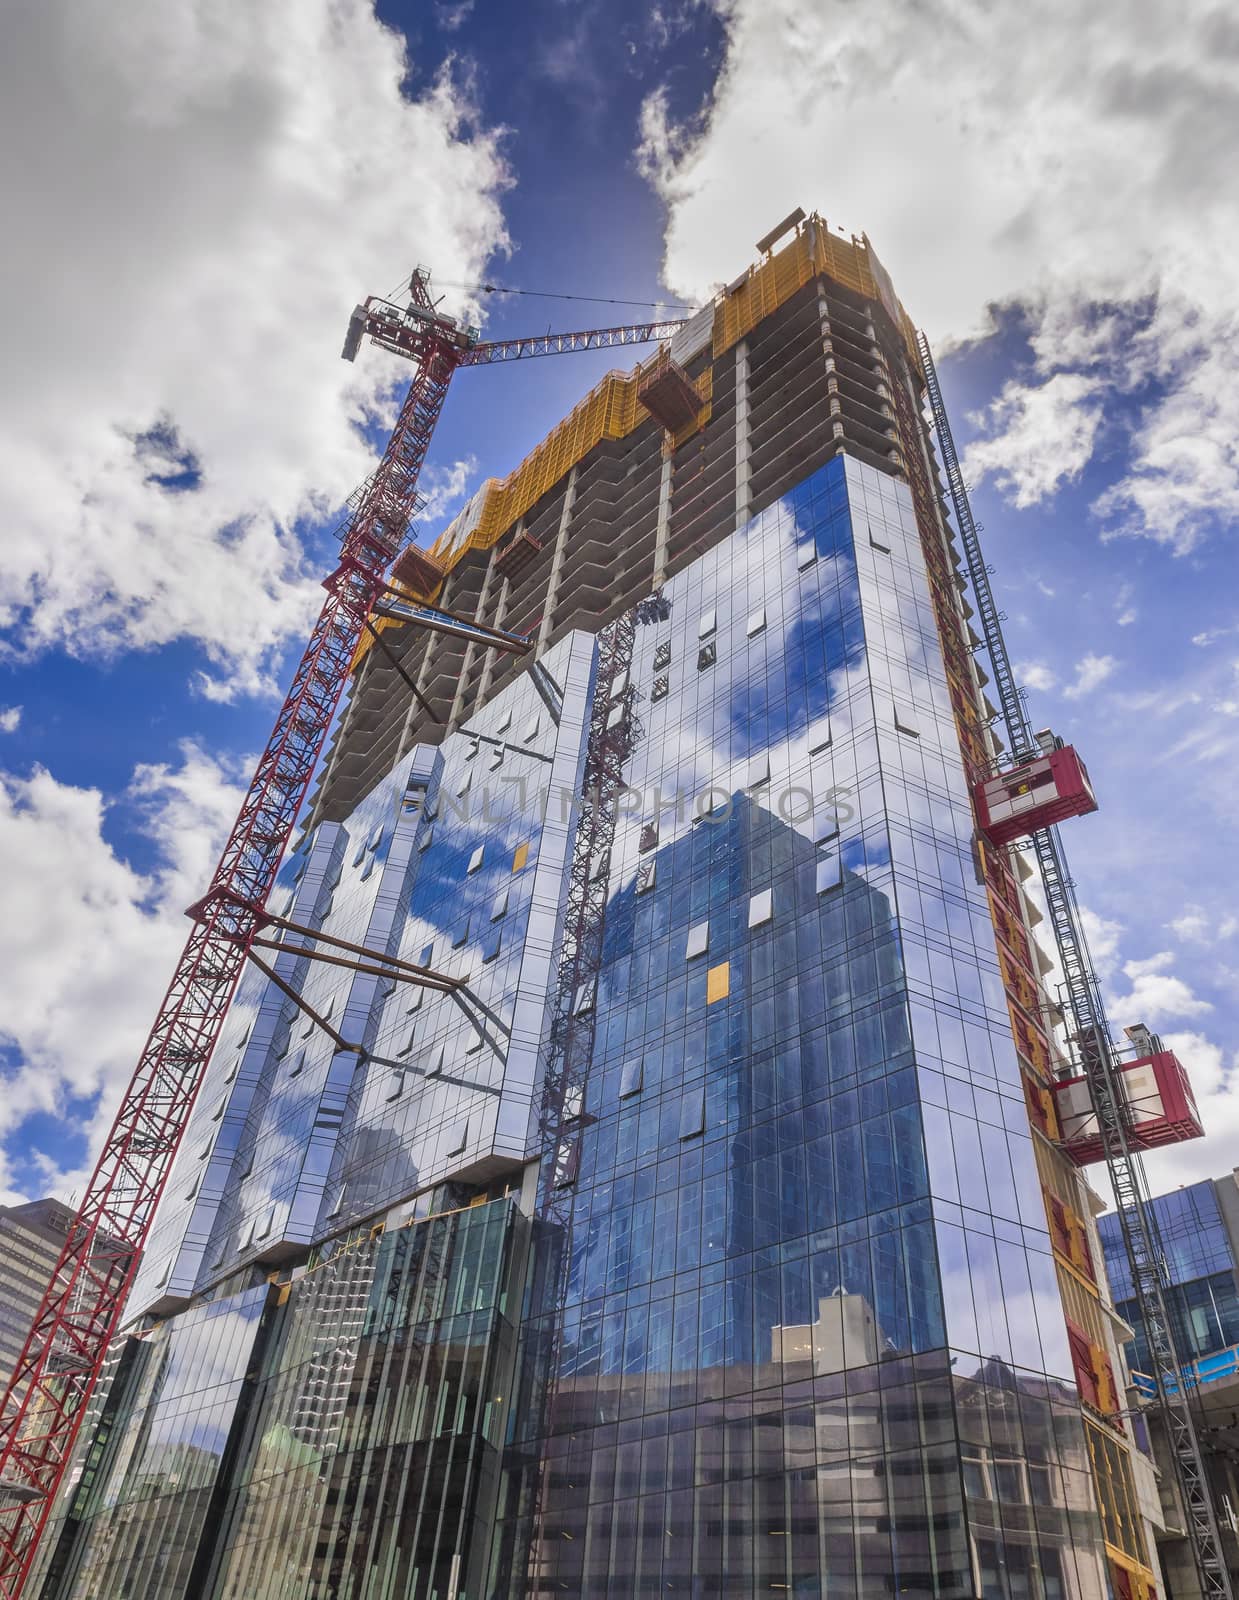 New glass building construction by f/2sumicron